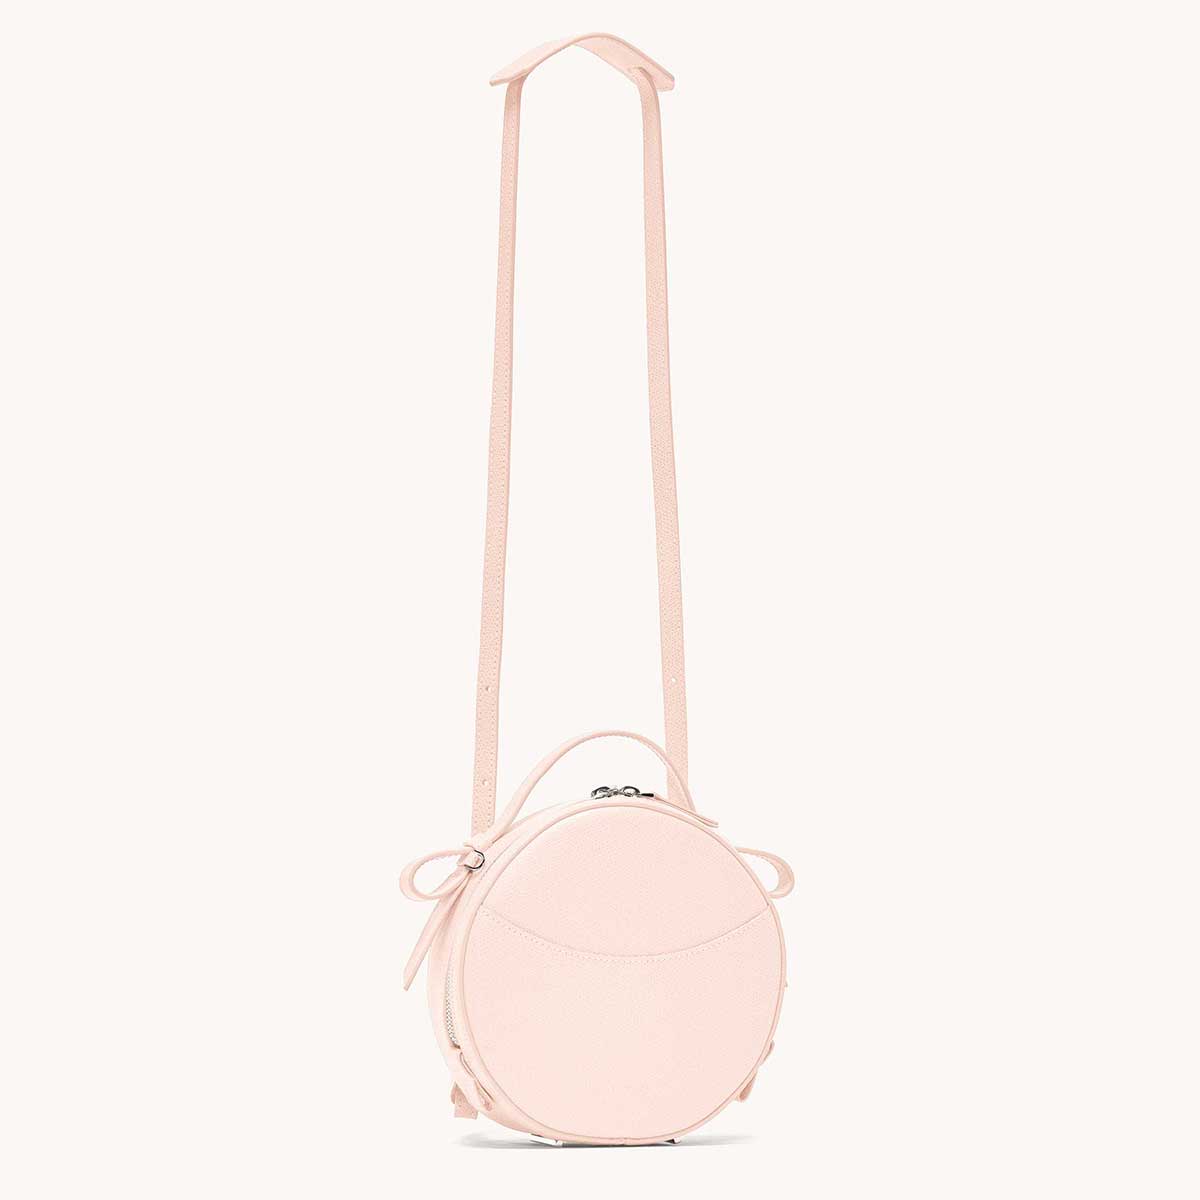 circa bag pebbled blush side view with long strap